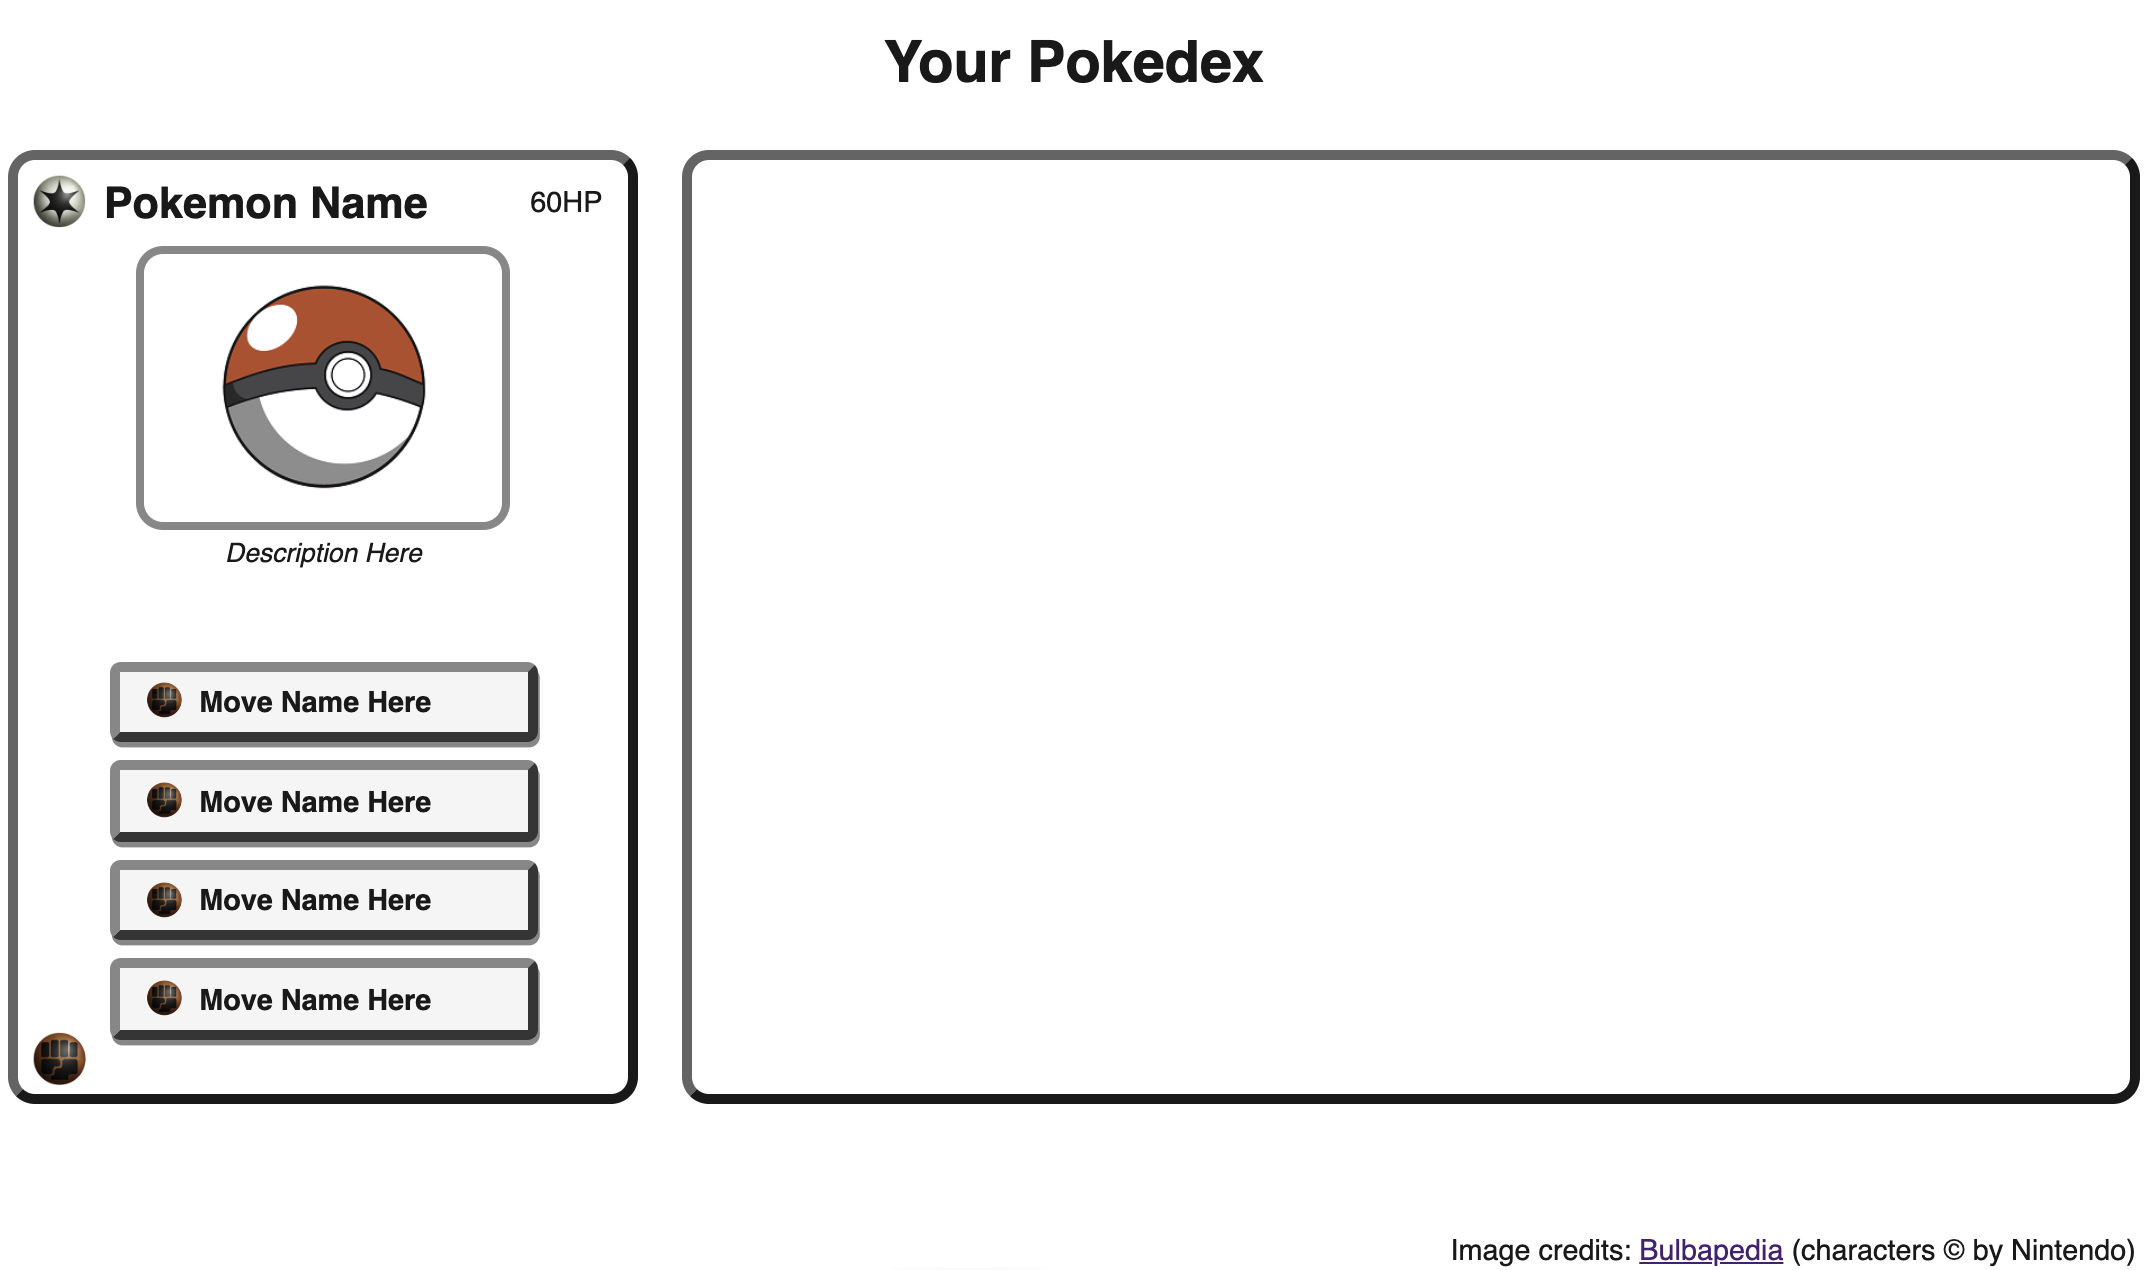 Solved In this assignment, you are going to build a Pokédex.